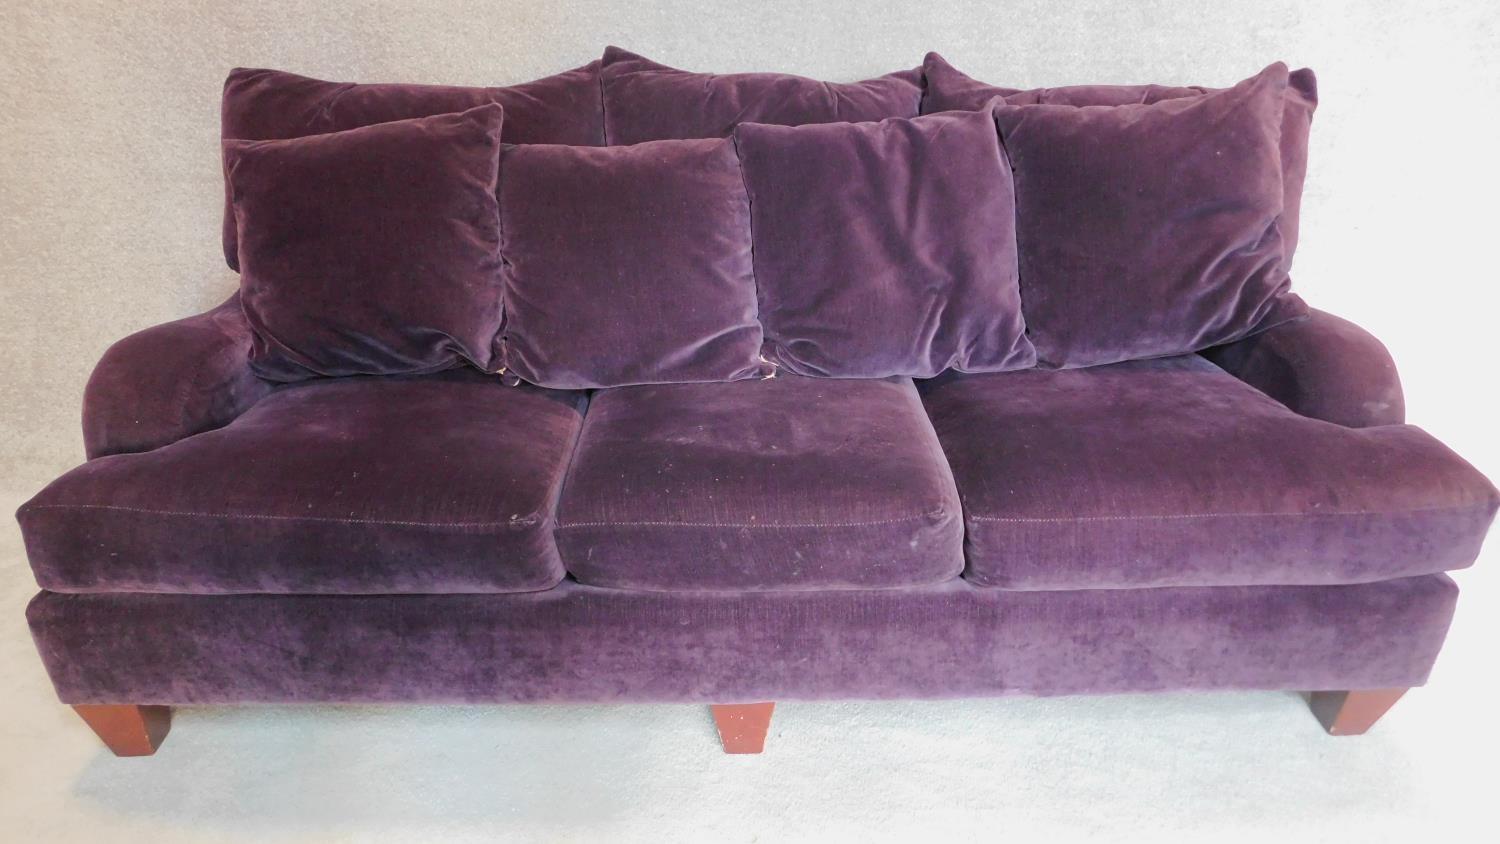 A Victorian style three seater sofa in purple velvet upholstery, makers label: Bernhardt.